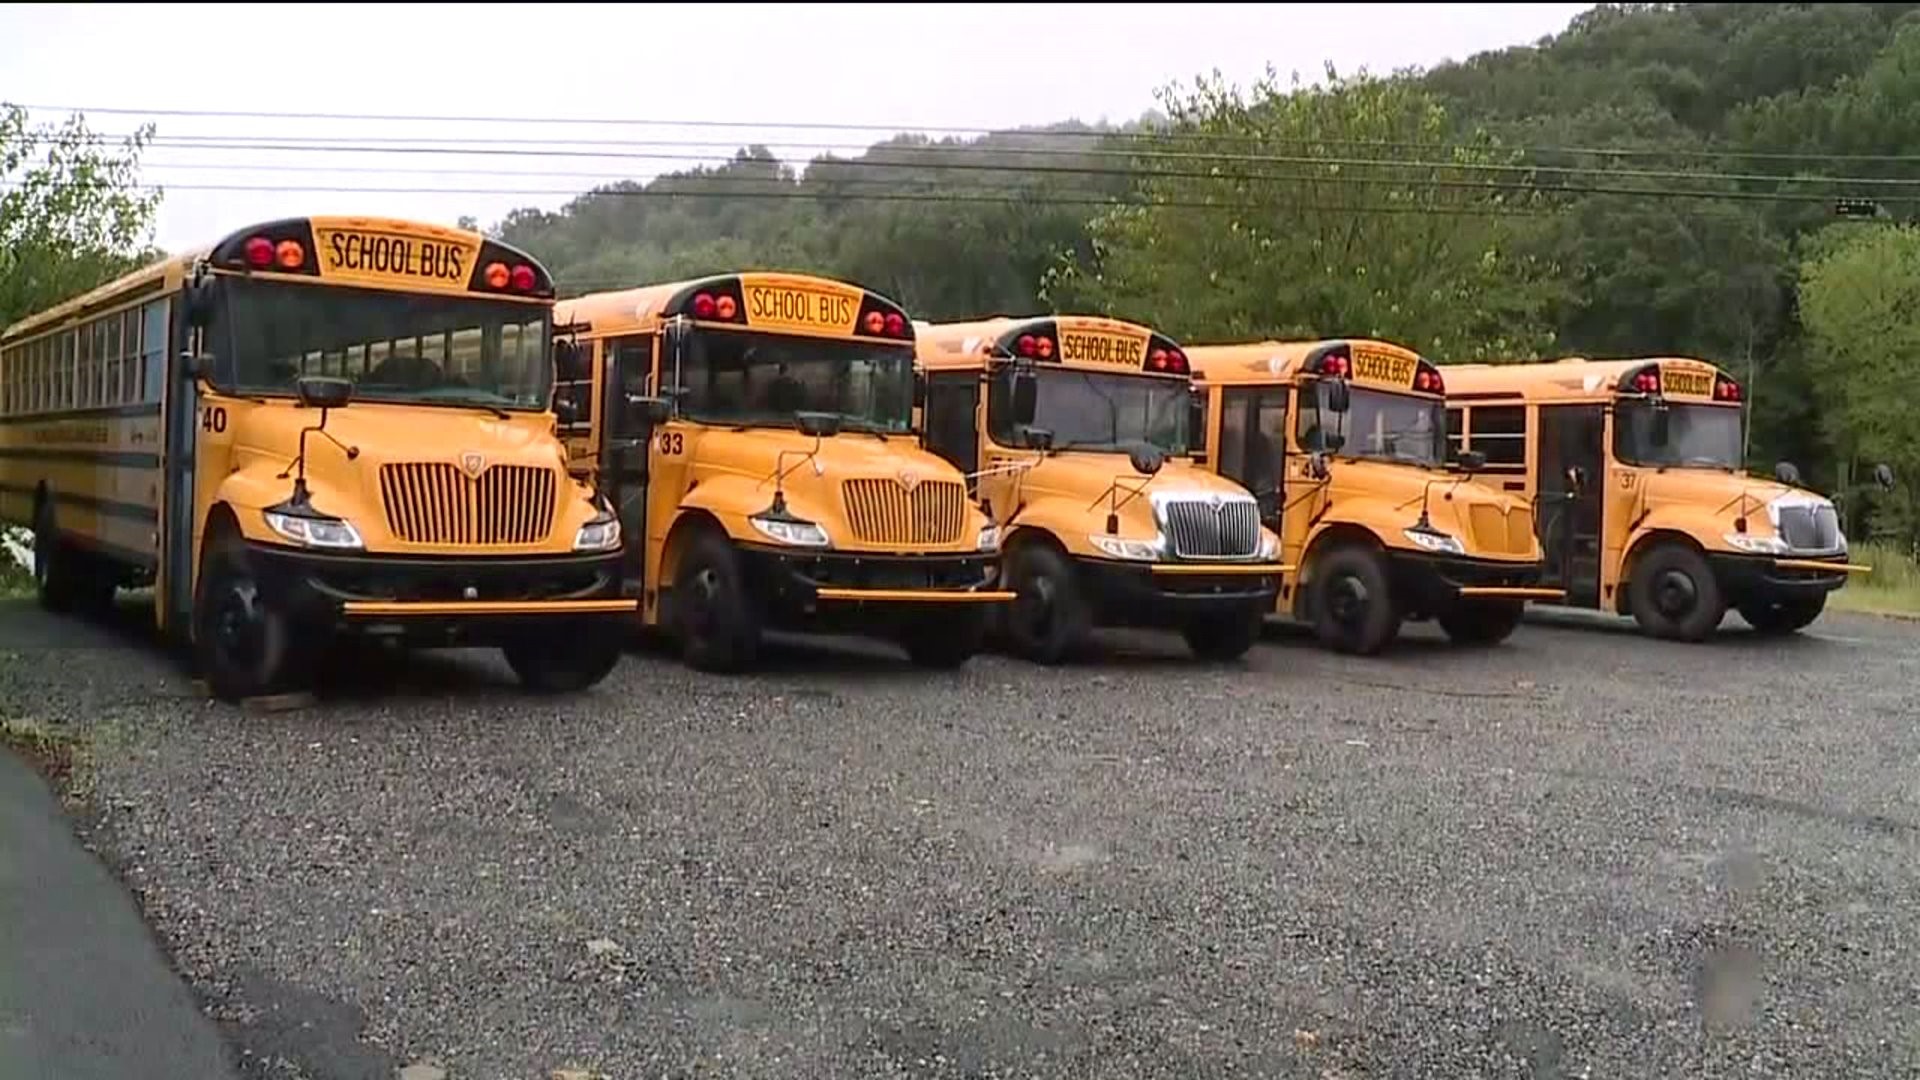 Demanding School Bus Safety Changes After Deadly Crashes Across the County